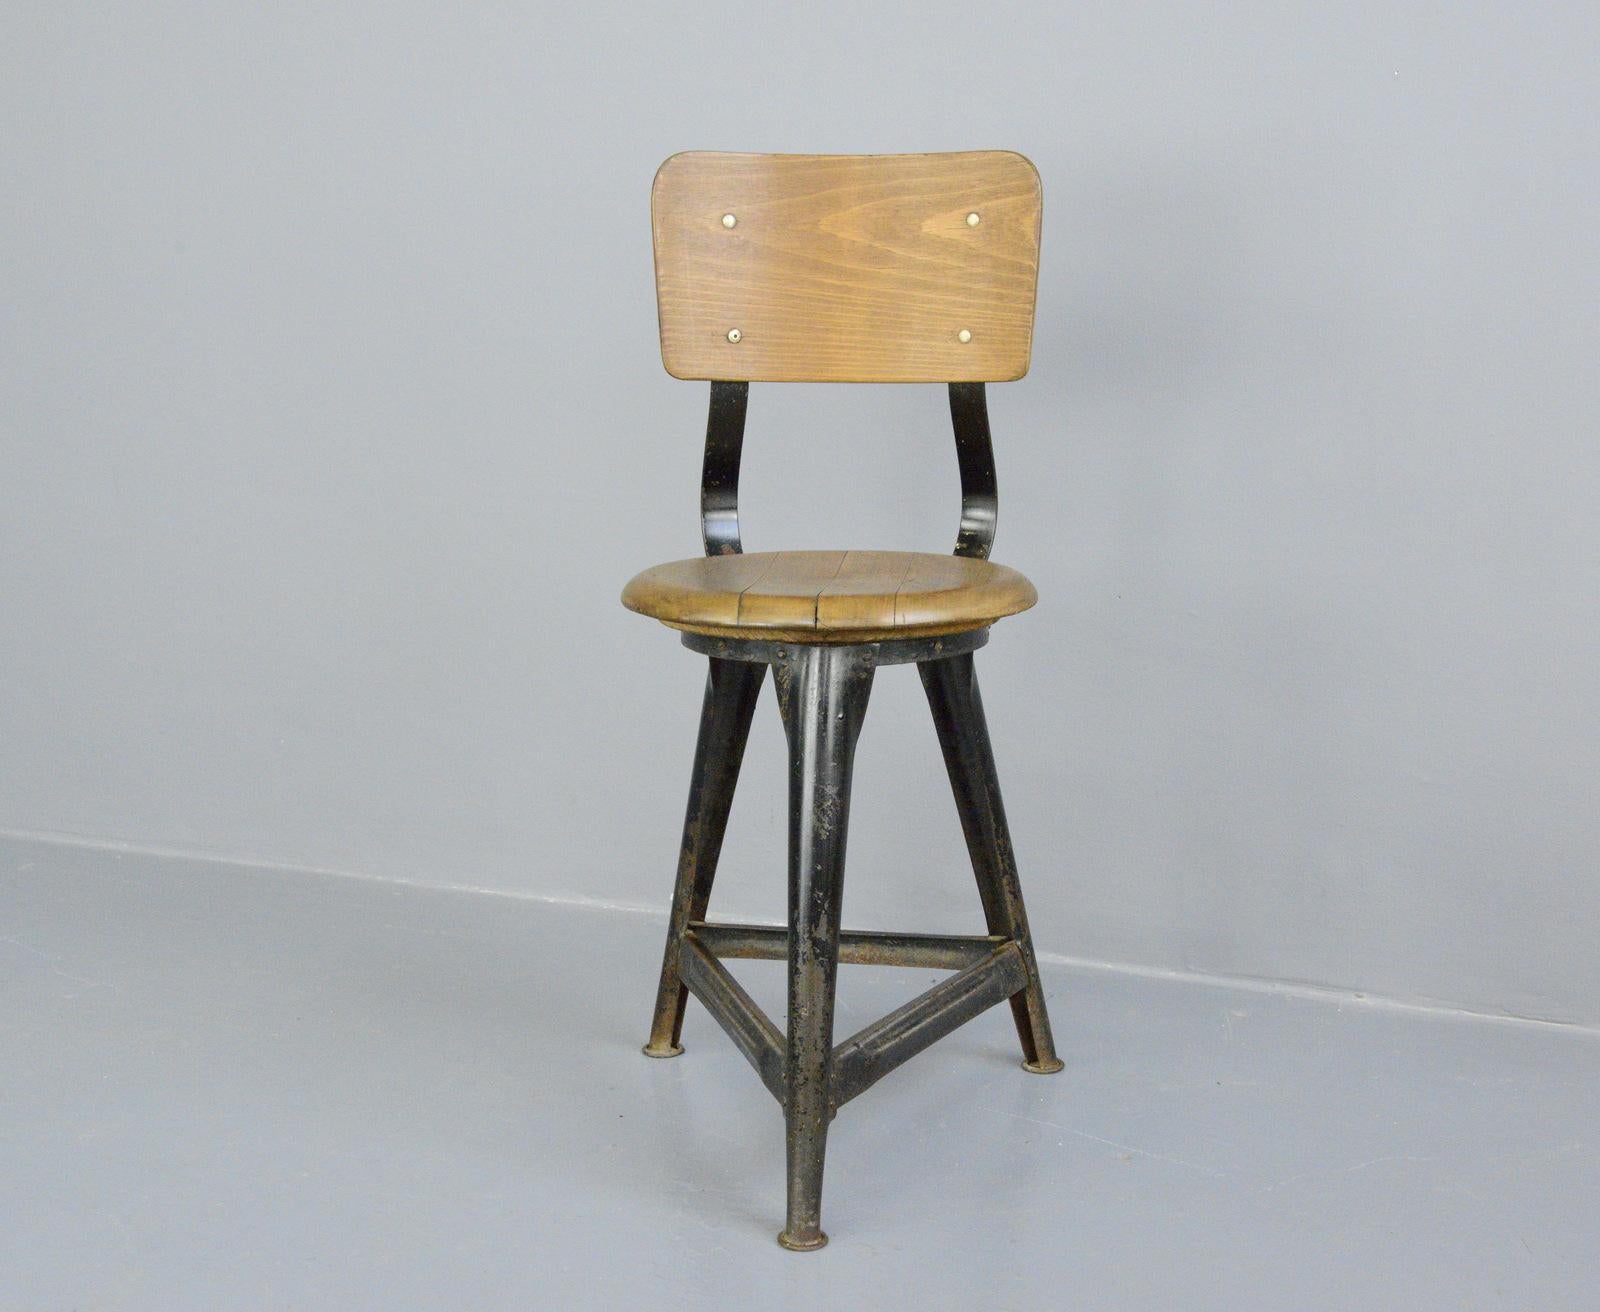 Industrial work stools by Ama, circa 1930s

- Price is per stool
- Steel frame
- Solid Elm seat with ply back rest
- Designed by Albert Menger 
- Produced by Ama, Nordhalben
- German ~ 1930s
- 35cm wide x 41cm deep 
- 50cm seat